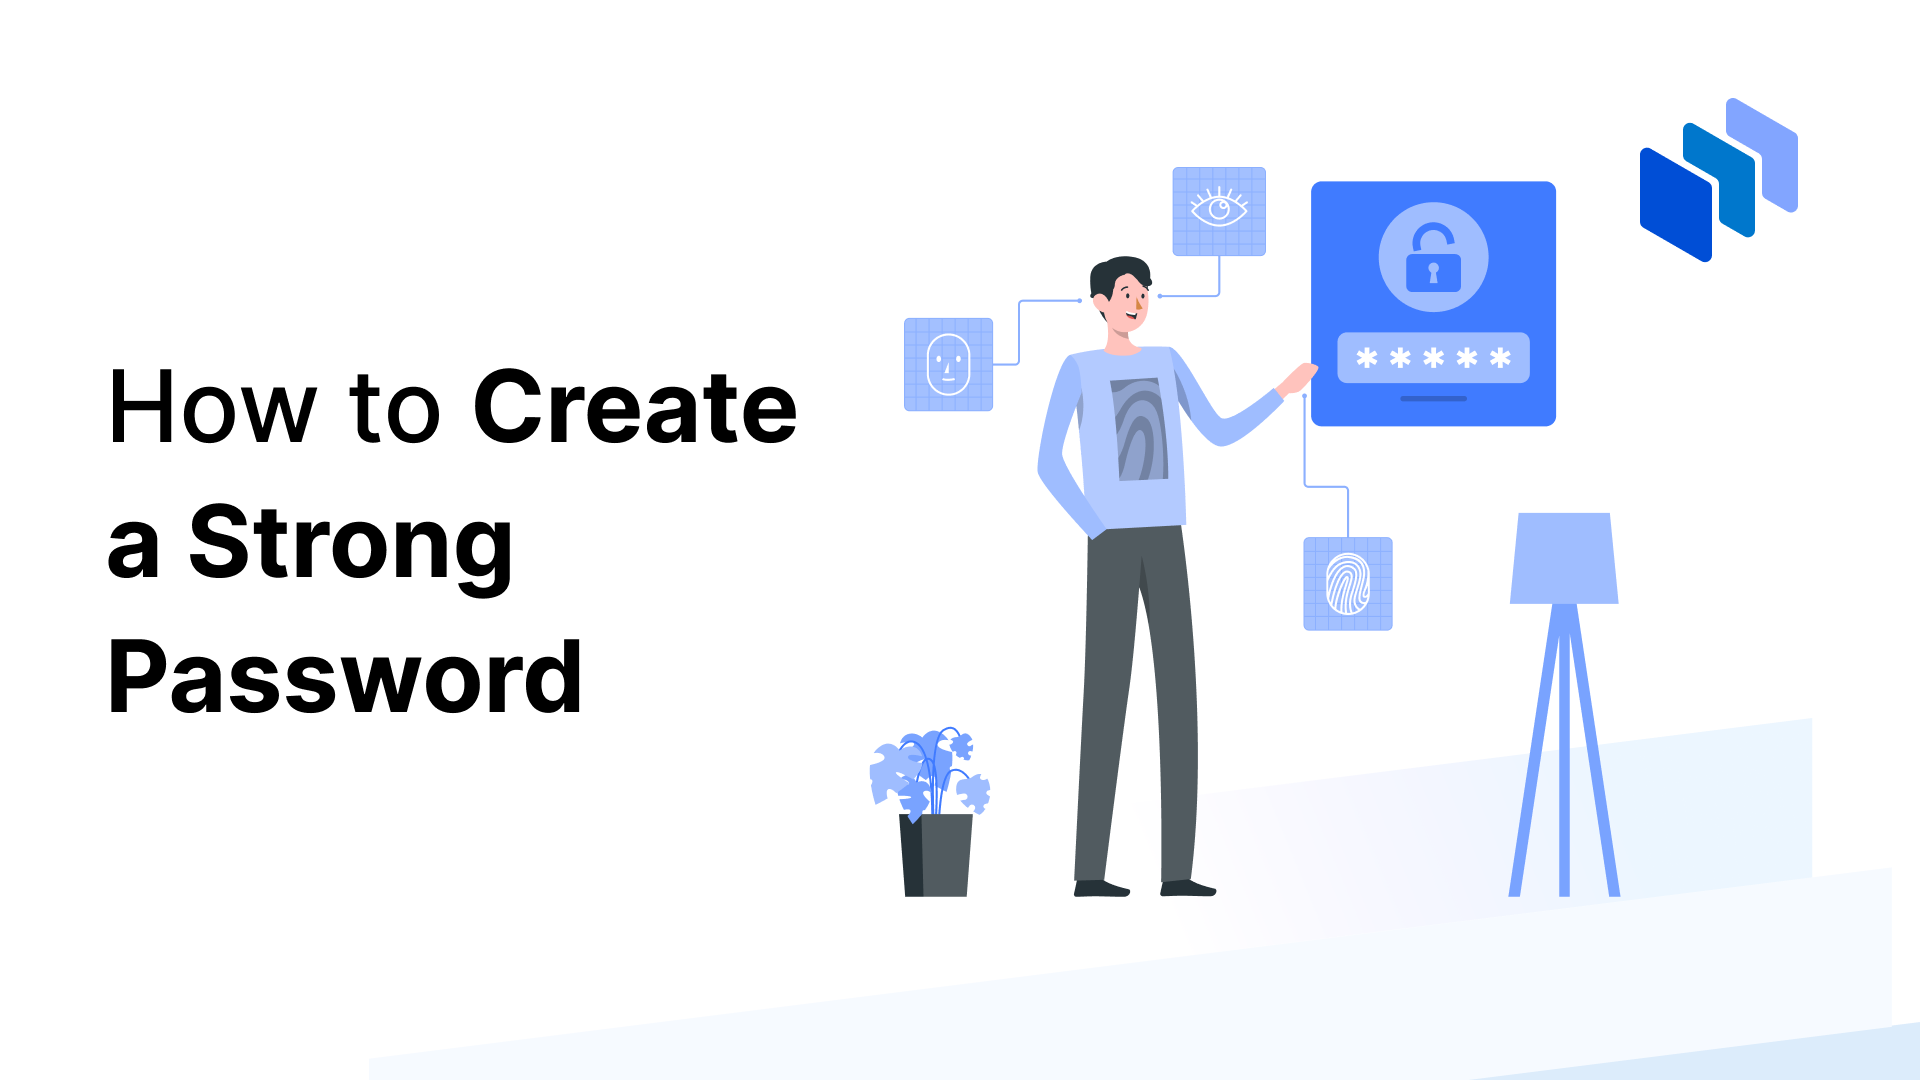 Illustration of crafting a strong password